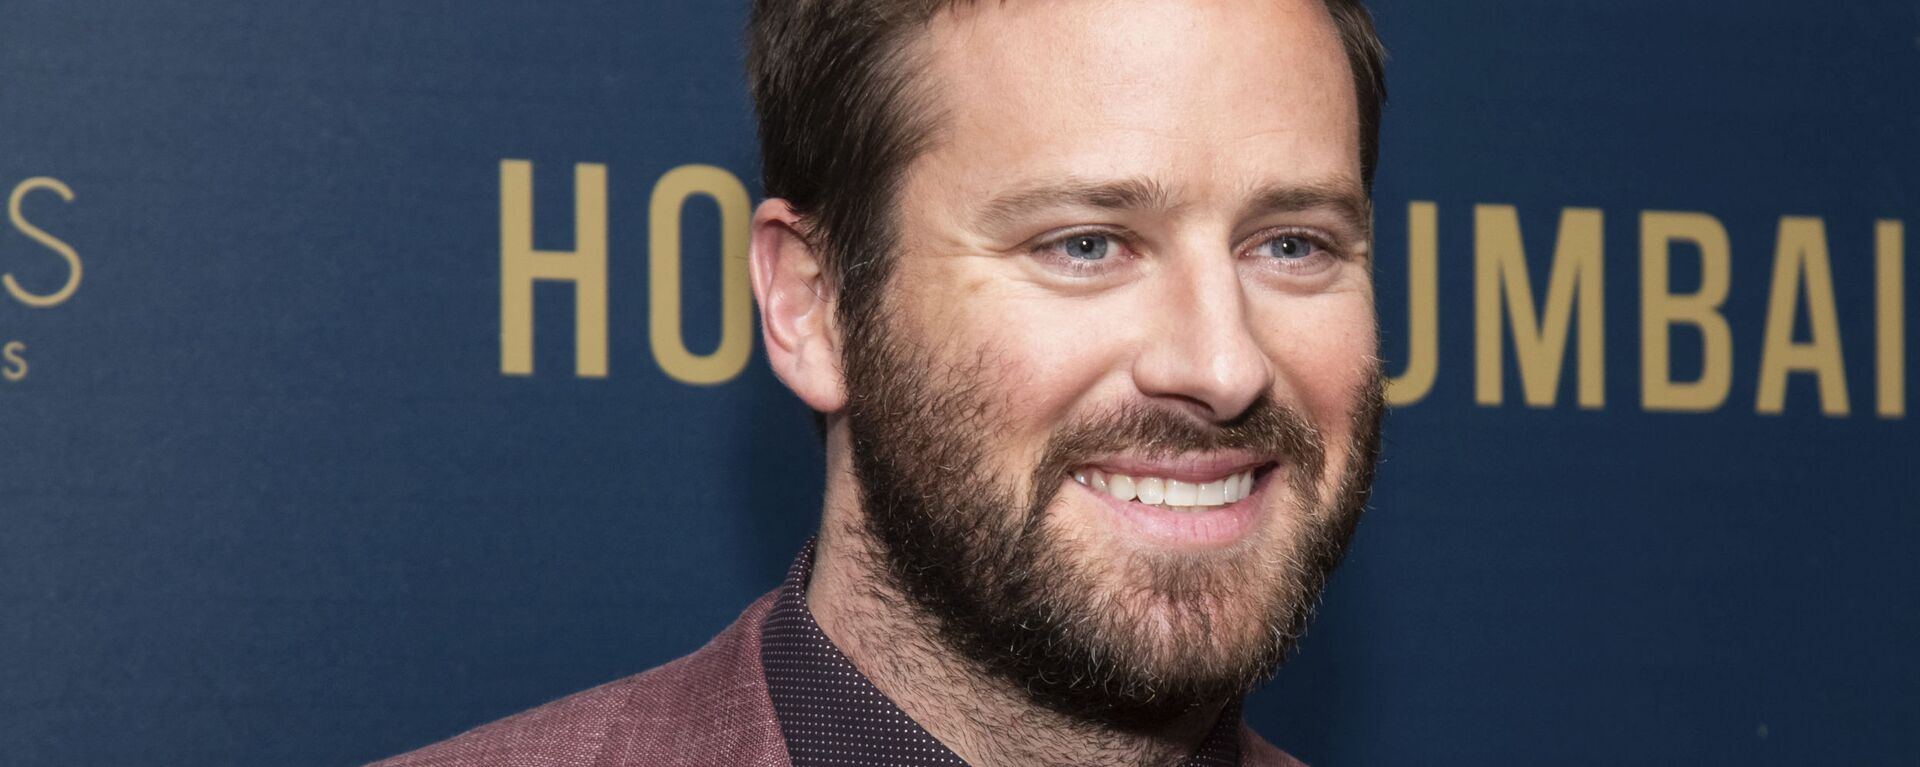 Armie Hammer attends a screening of Hotel Mumbai hosted by Bleecker Street and ShivHans Pictures at the Museum of Modern Art on Sunday, 17 March 2019, in New York, US. - Sputnik International, 1920, 29.01.2021